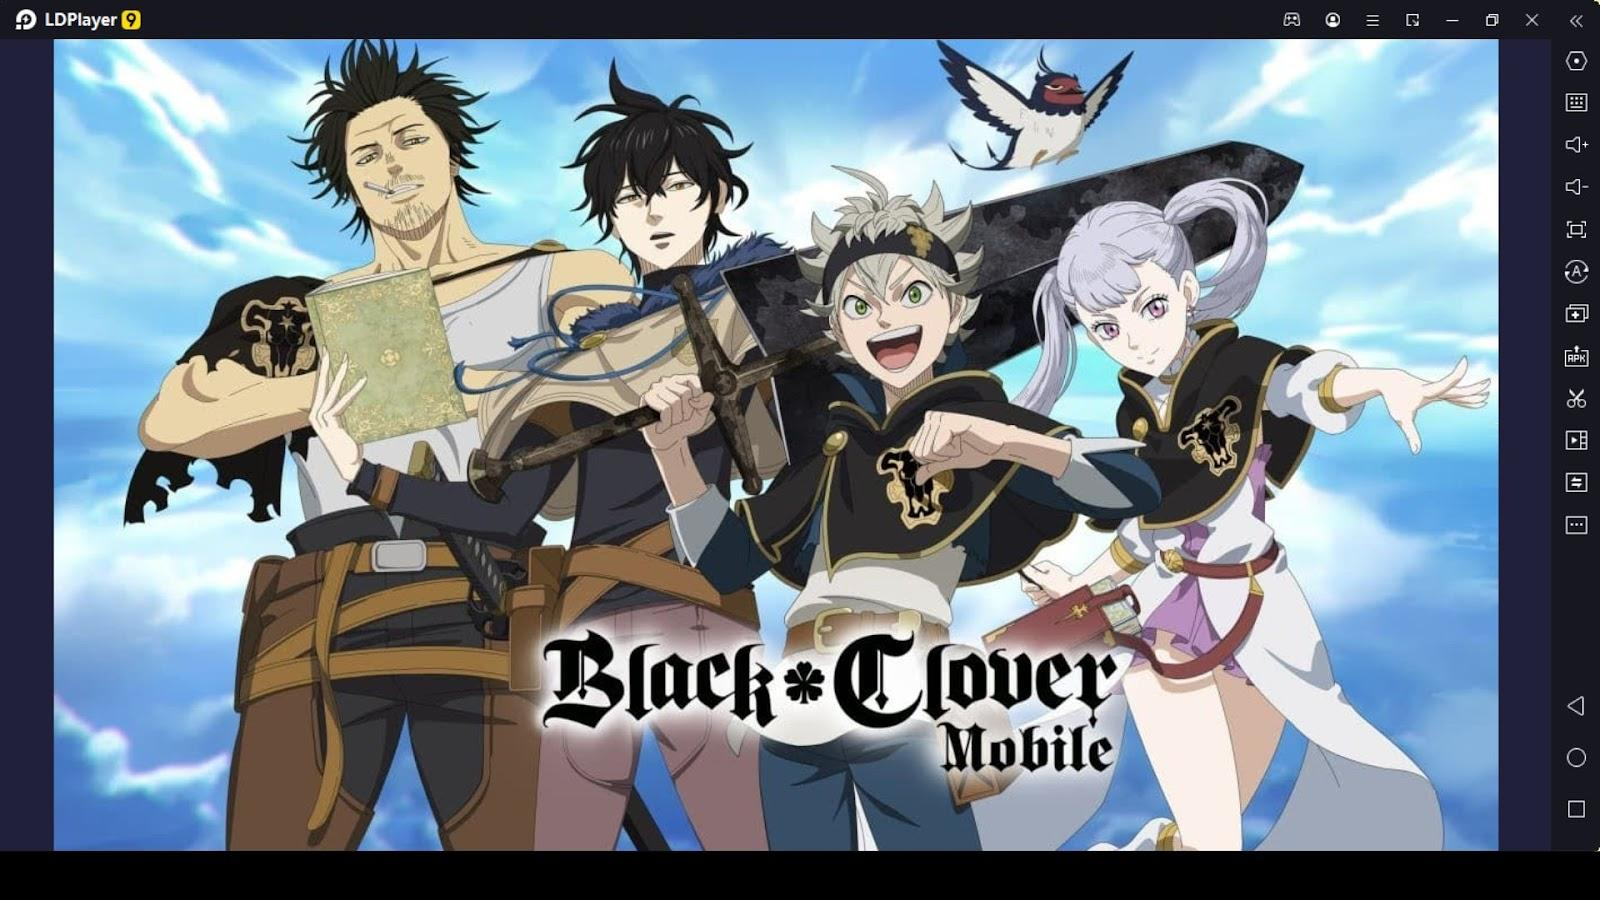 Black Clover Mobile Tier List and Reroll Guide for Best Characters –March  2023-Game Guides-LDPlayer